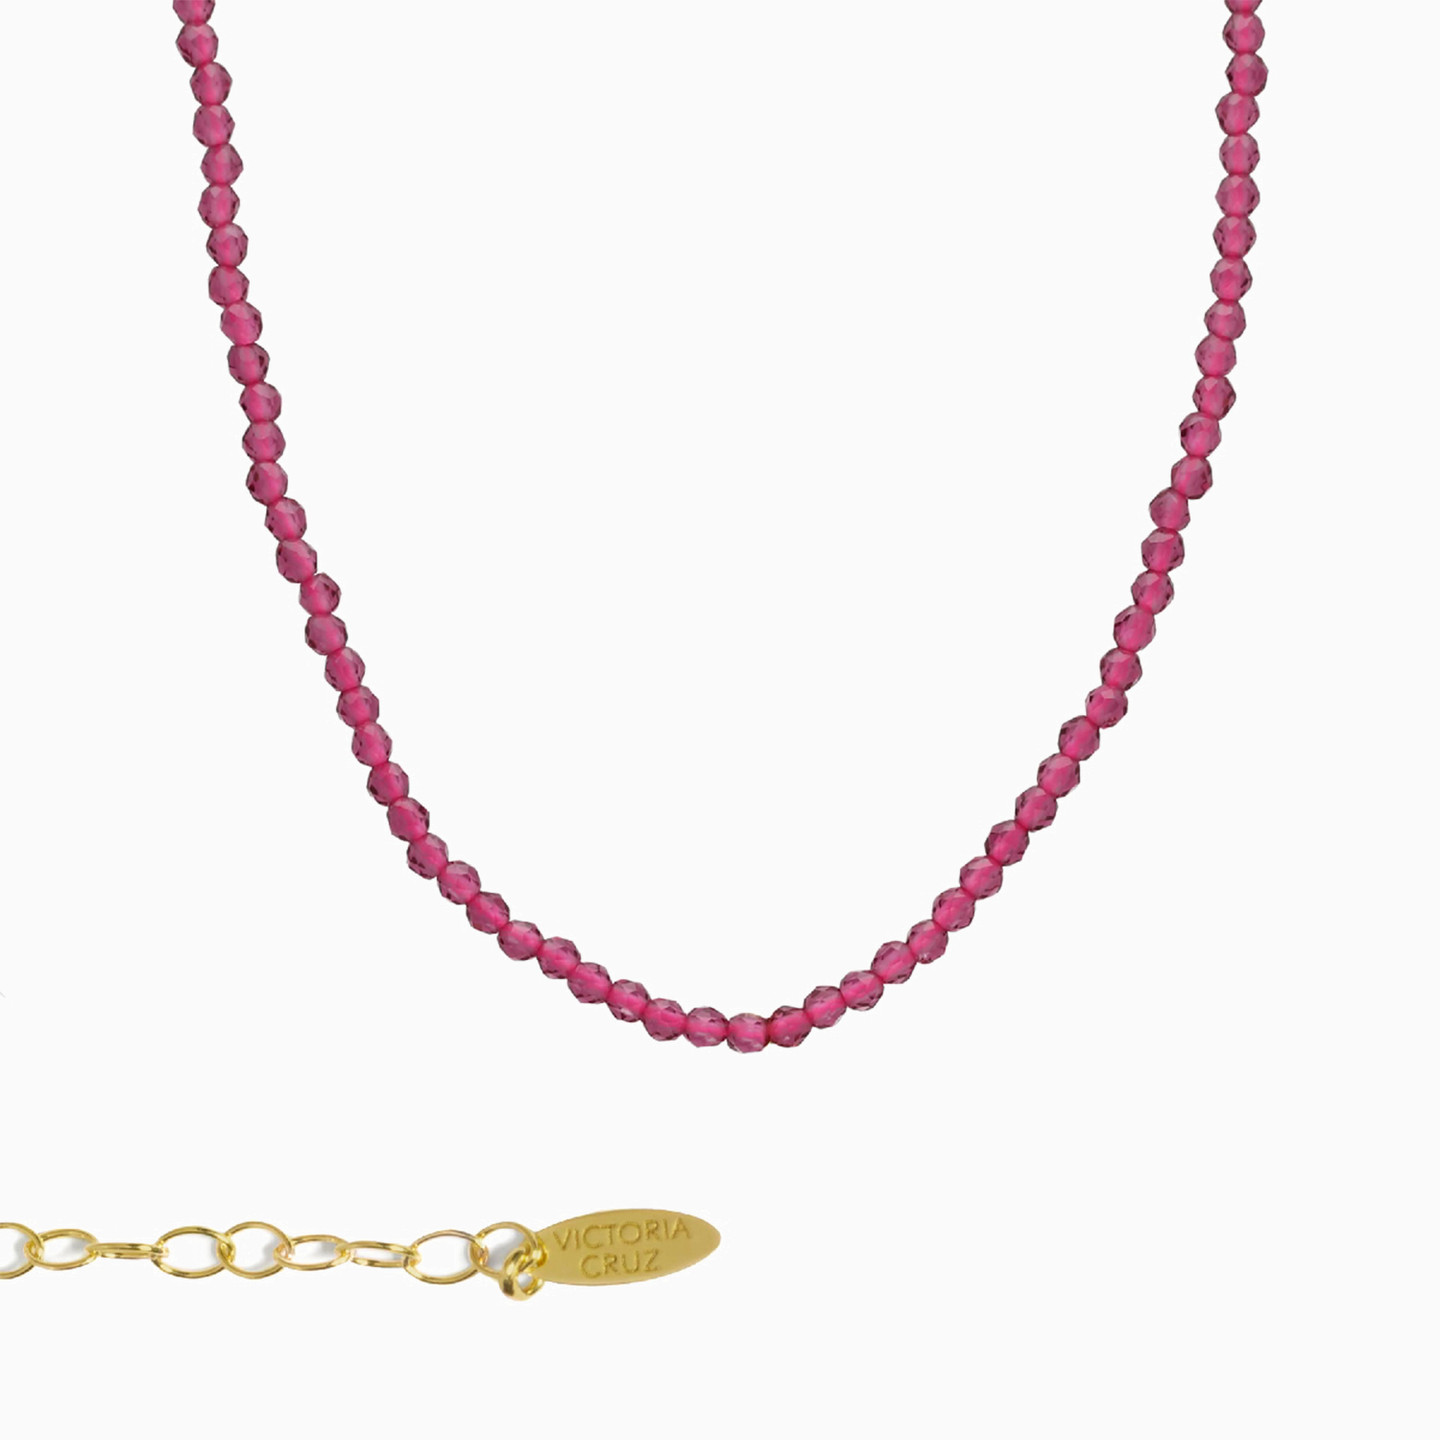 Gold Plated Colored Stones Chain Necklace